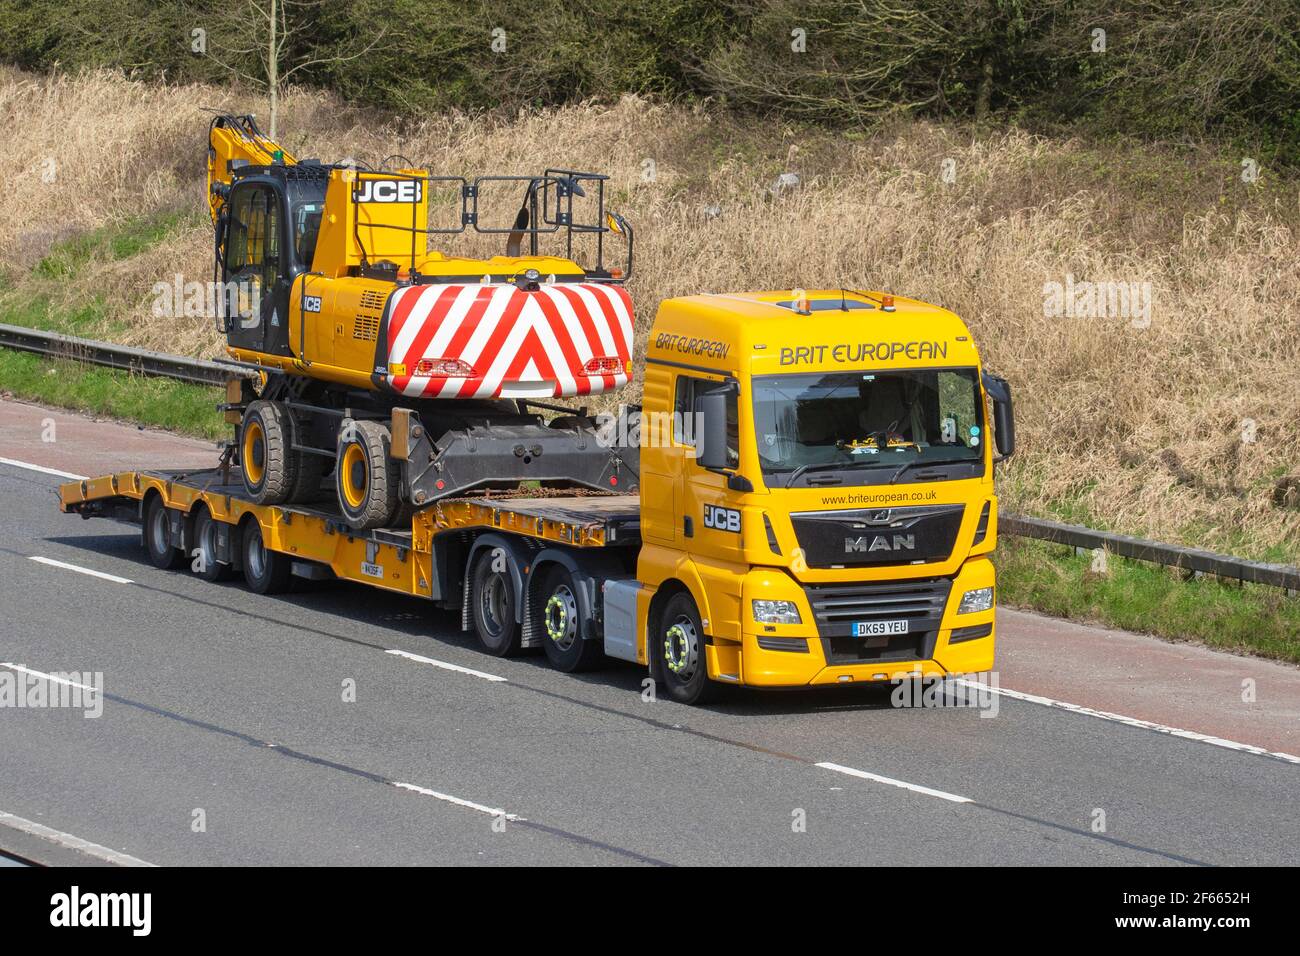 Brit European Transport Ltd; Haulage delivery trucks, JCB lorry, heavy-duty vehicles, transportation, truck, cargo carrier, Man vehicle, European commercial transport industry HGV, M6 at Manchester, UK Stock Photo